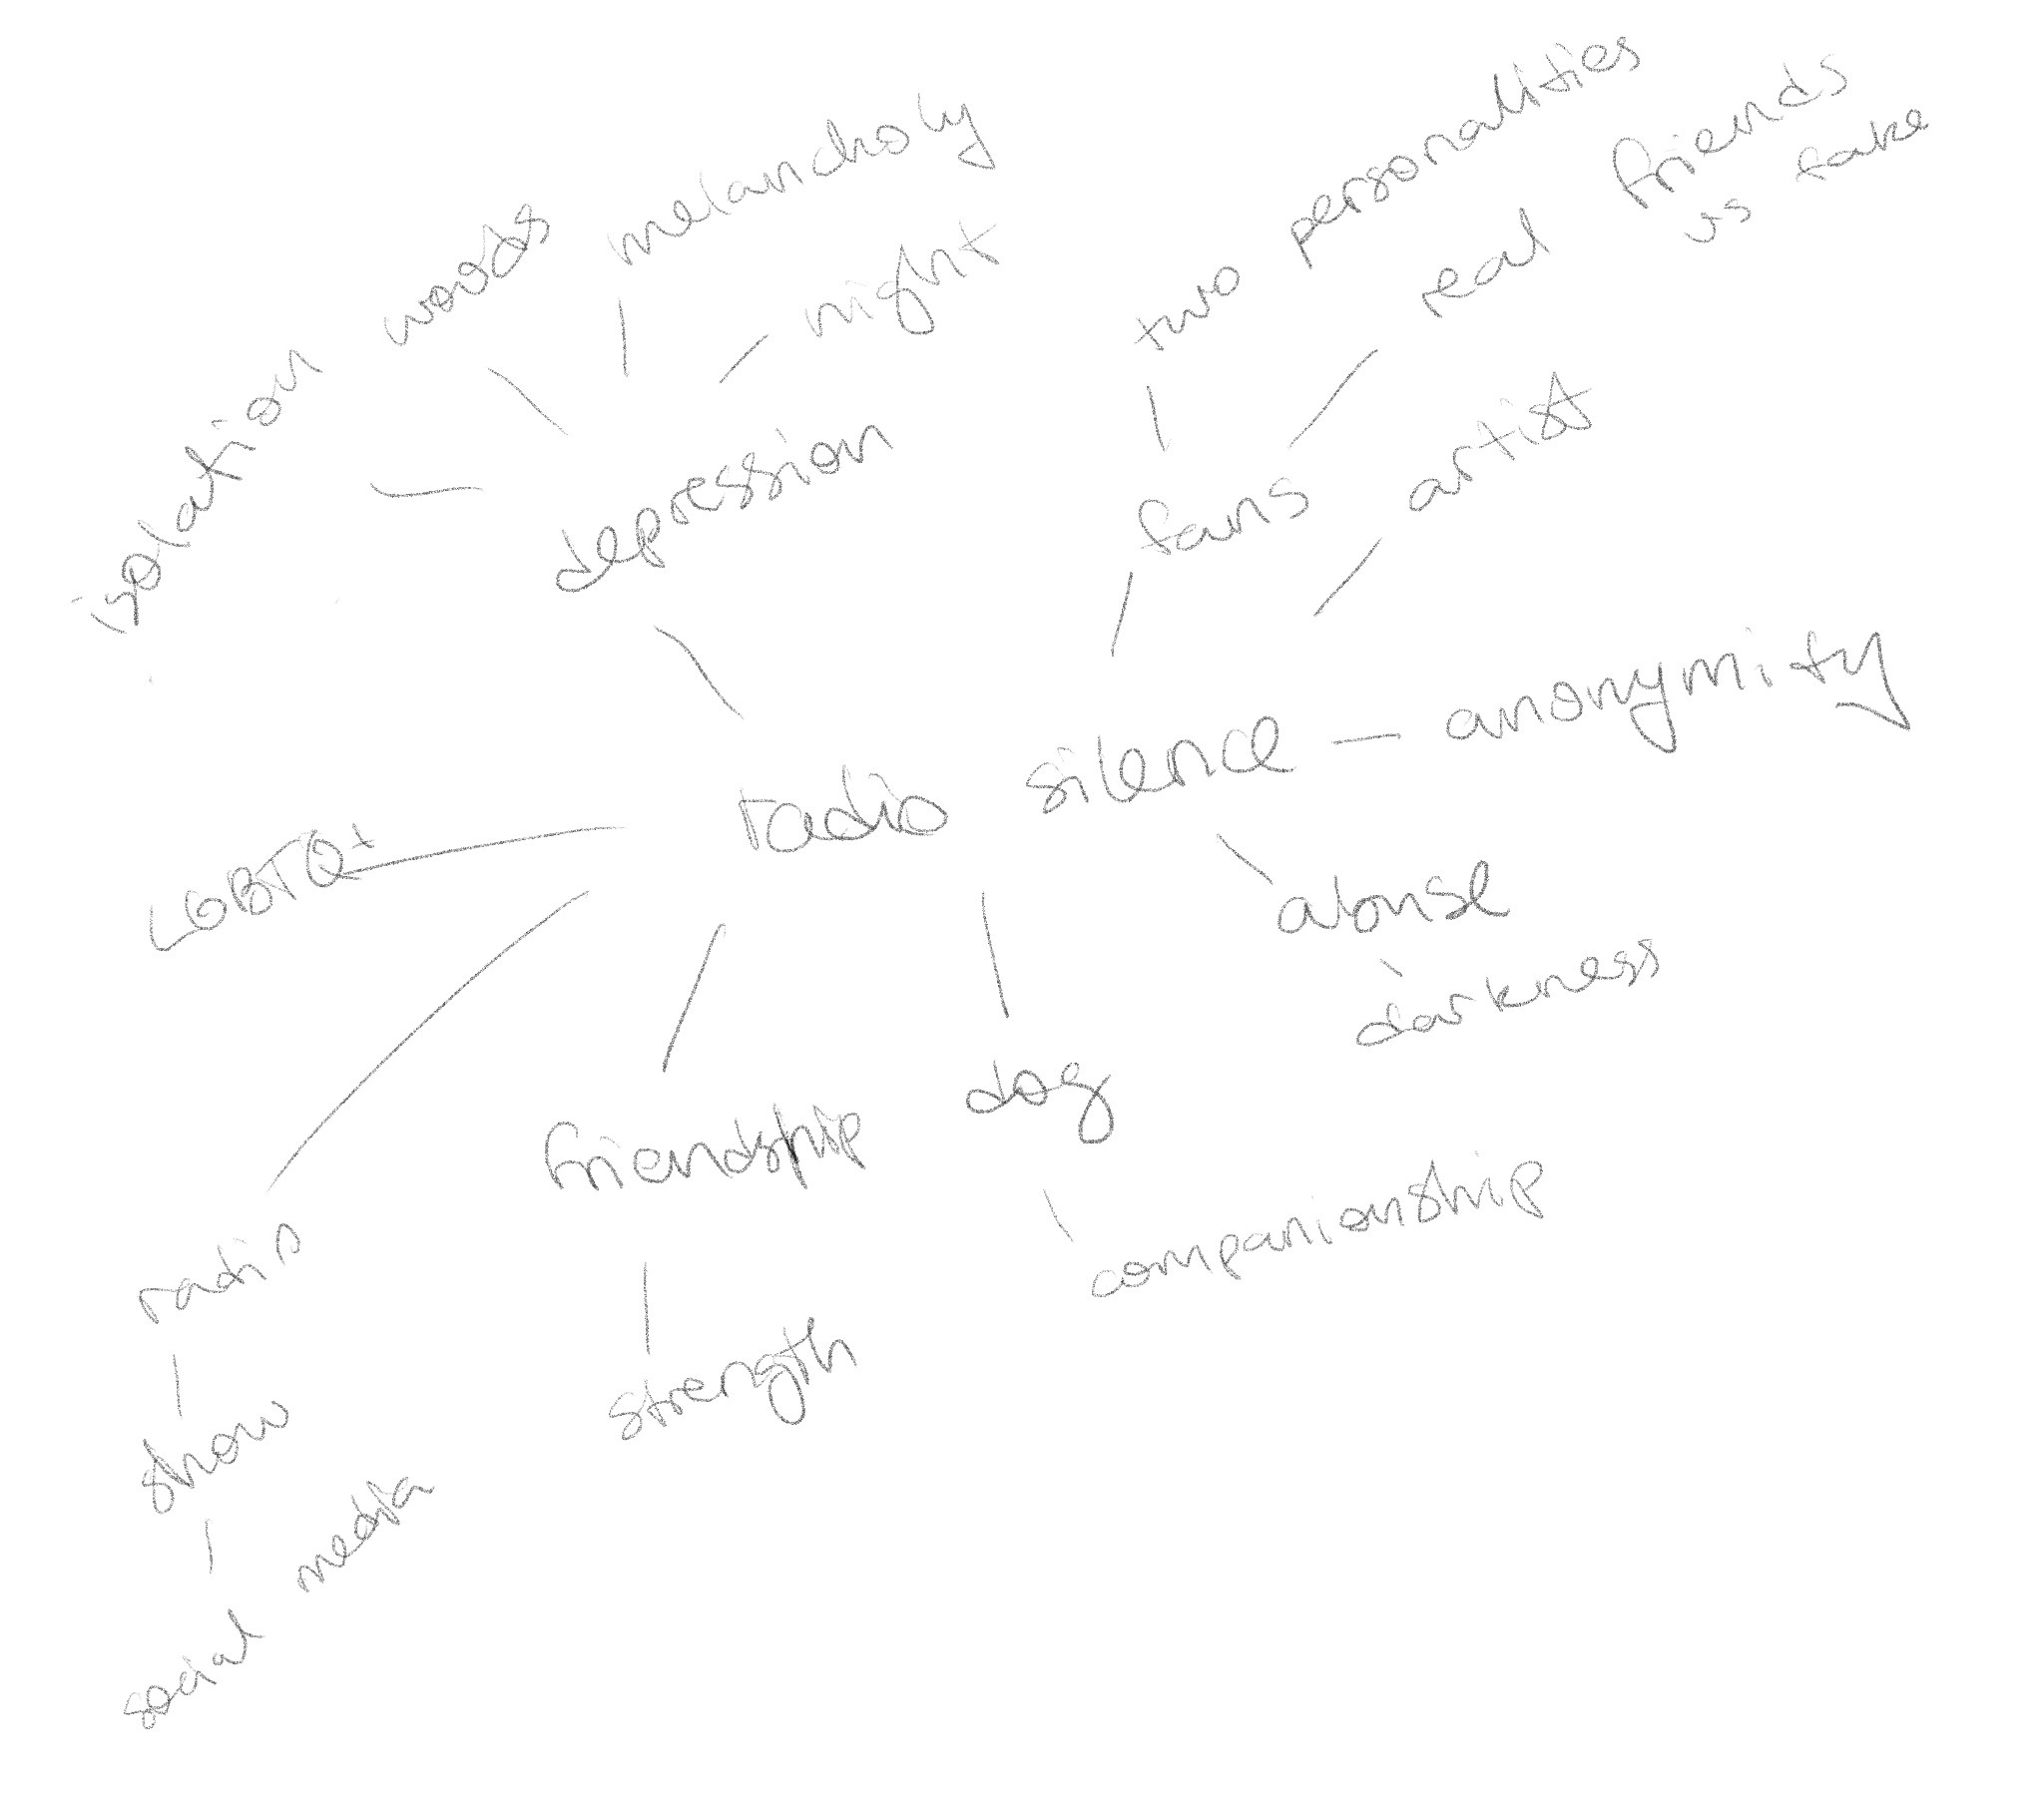 Mind map for Radio Silence. Features words like 'anonymity', 'depression', 'friendship', 'social media', 'fans', and others.